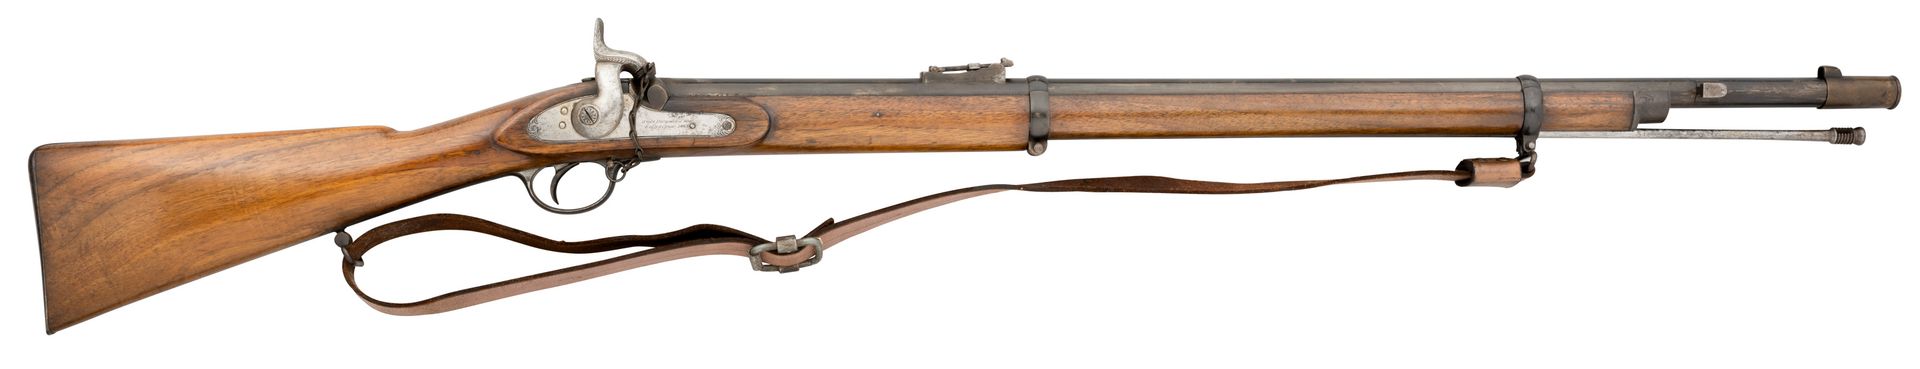 A .577 CALIBRE PERCUSSION MILITARY RIFLE BY JOHN DICKSON AND SONS A .577 CALIBRE&hellip;